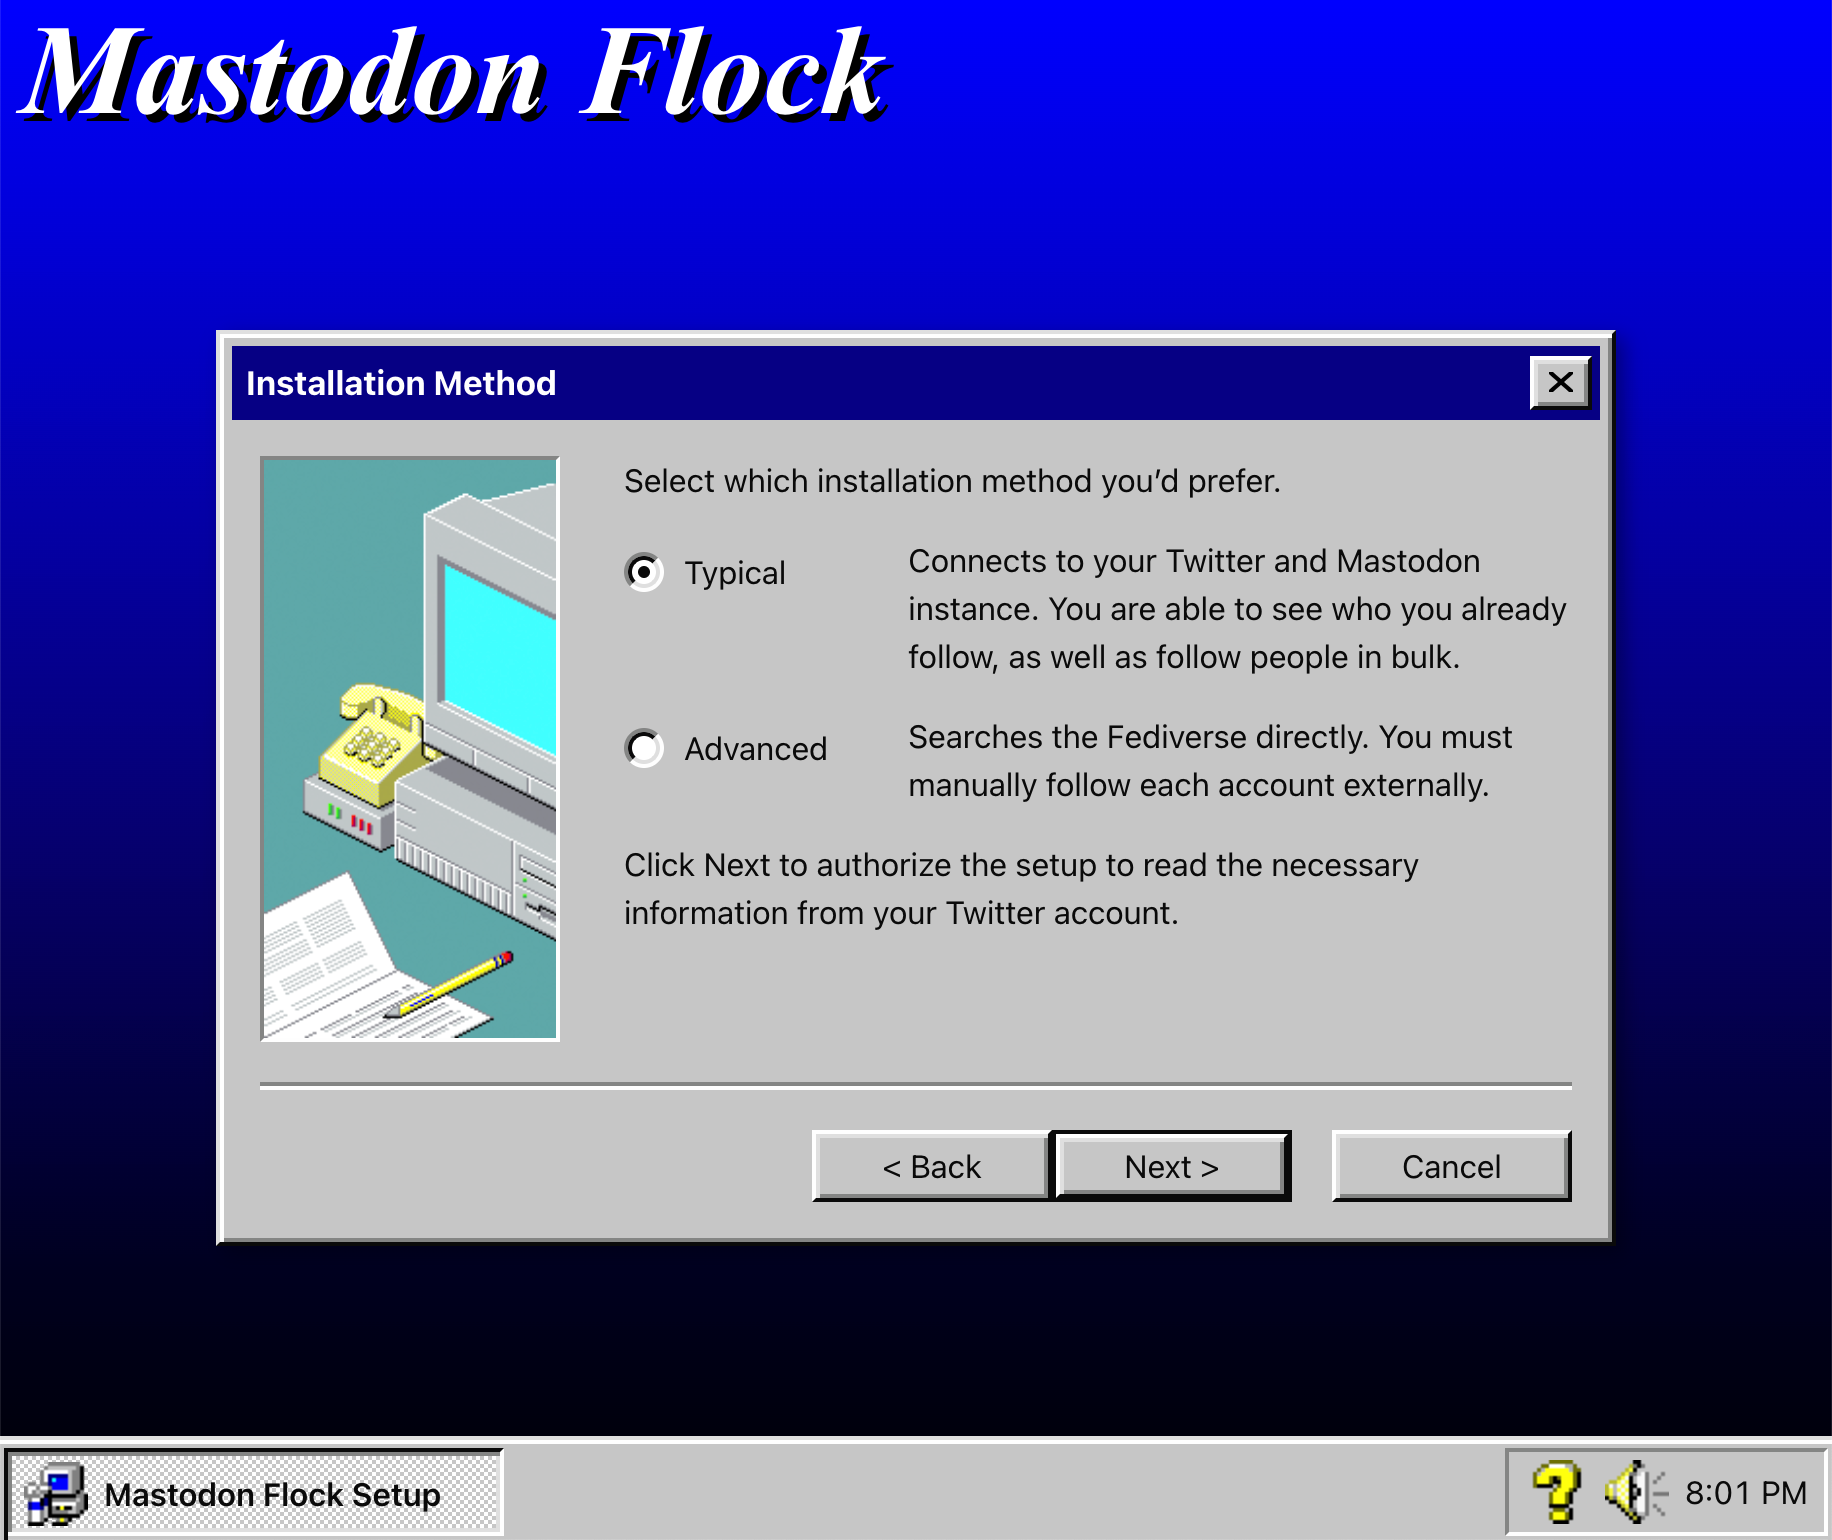 A UI that looks like Windows 95's installation wizard, complete with a system tray that contains a clock and volume icon. The title of the installer is 'Mastodon Flock.' Floating in the center of the screenshot is an application window titled, 'Installation Method'. Inside the window is the prompt, 'Select wich installation method you'd prefer.', followed by two radio options. The first option is 'Typical,' with a following description that reads, 'Connects to your Twitter and Mastodon instance. You are able to see who you already follow, as well as follow people in bulk.' The second radio option is, 'Advanced,' with a following description that reads, 'Searches the Fediverse directly. You must manually follow each account externally.' After the radiogroup is more instructions that read, 'Click Next to authorize the setup to read the necessary information from your Twitter account. At the bottom of the window are three buttons labeled, 'Back', 'Next', and 'Cancel'. Screenshot.